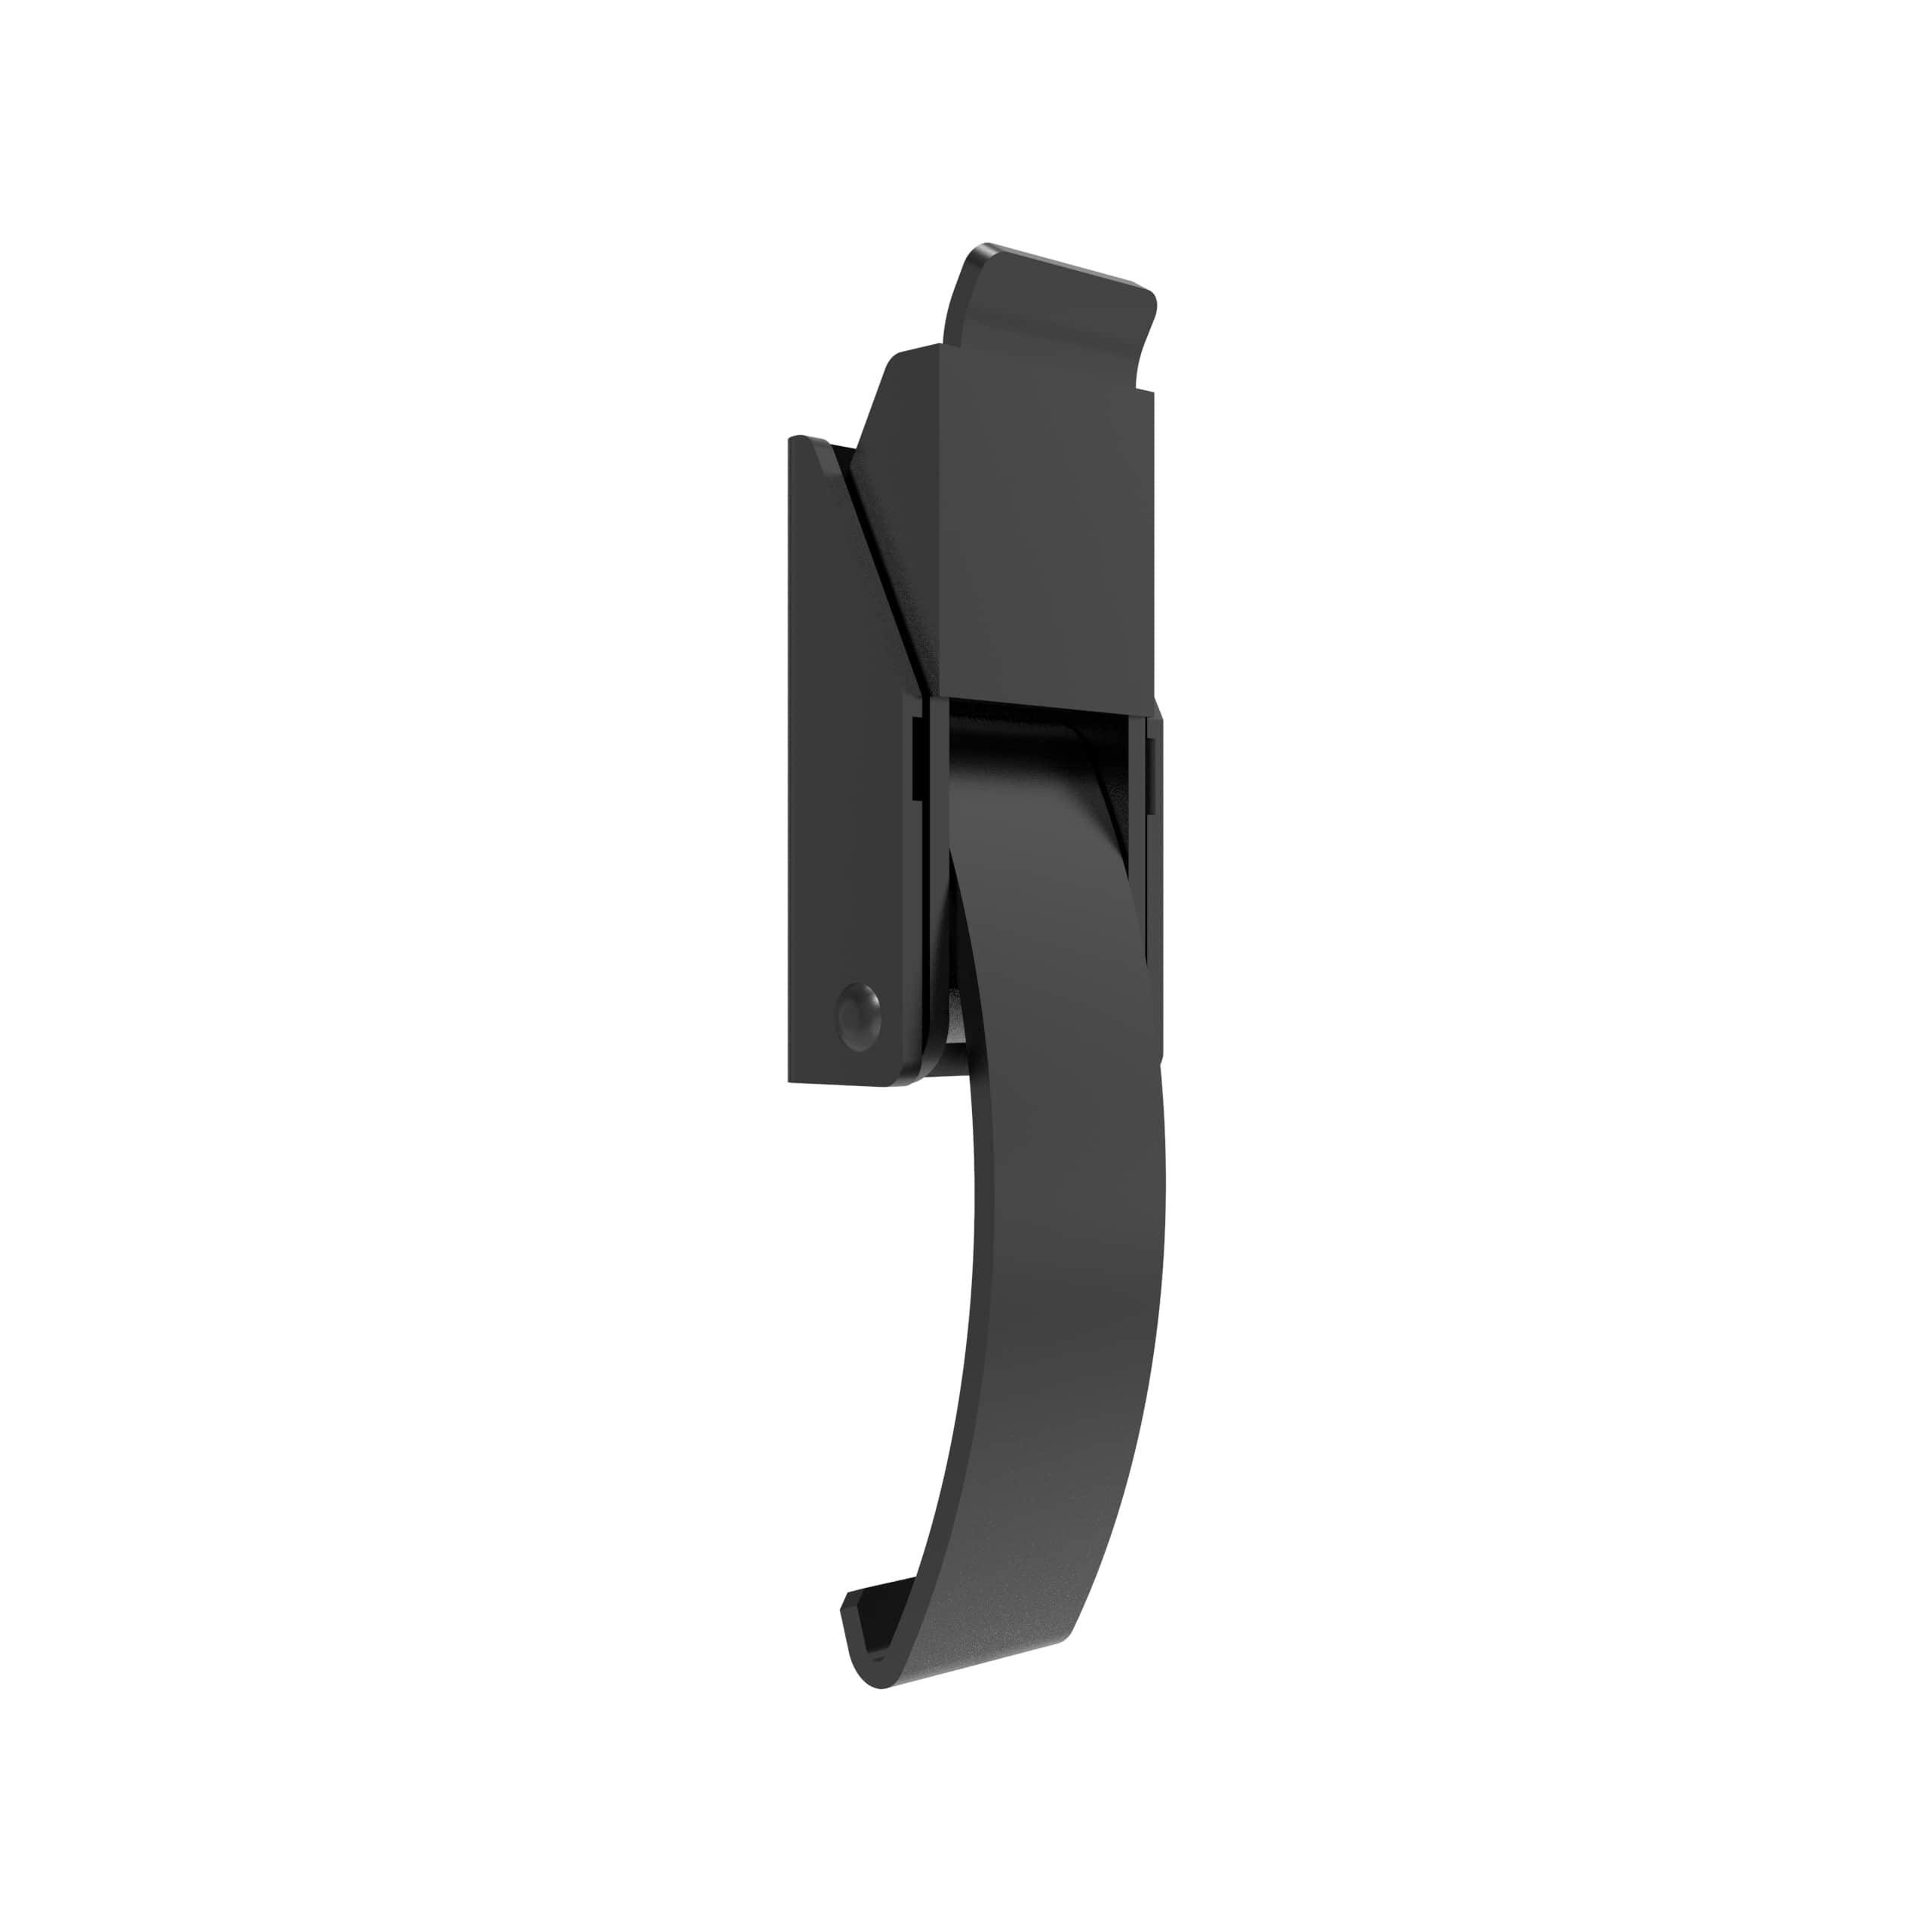 F-1641-16-40 | Over-center Draw Latch Small Size, Handle Tab Up,Middle connection,non-padlockable , Stainless Steel, Powder coating, black